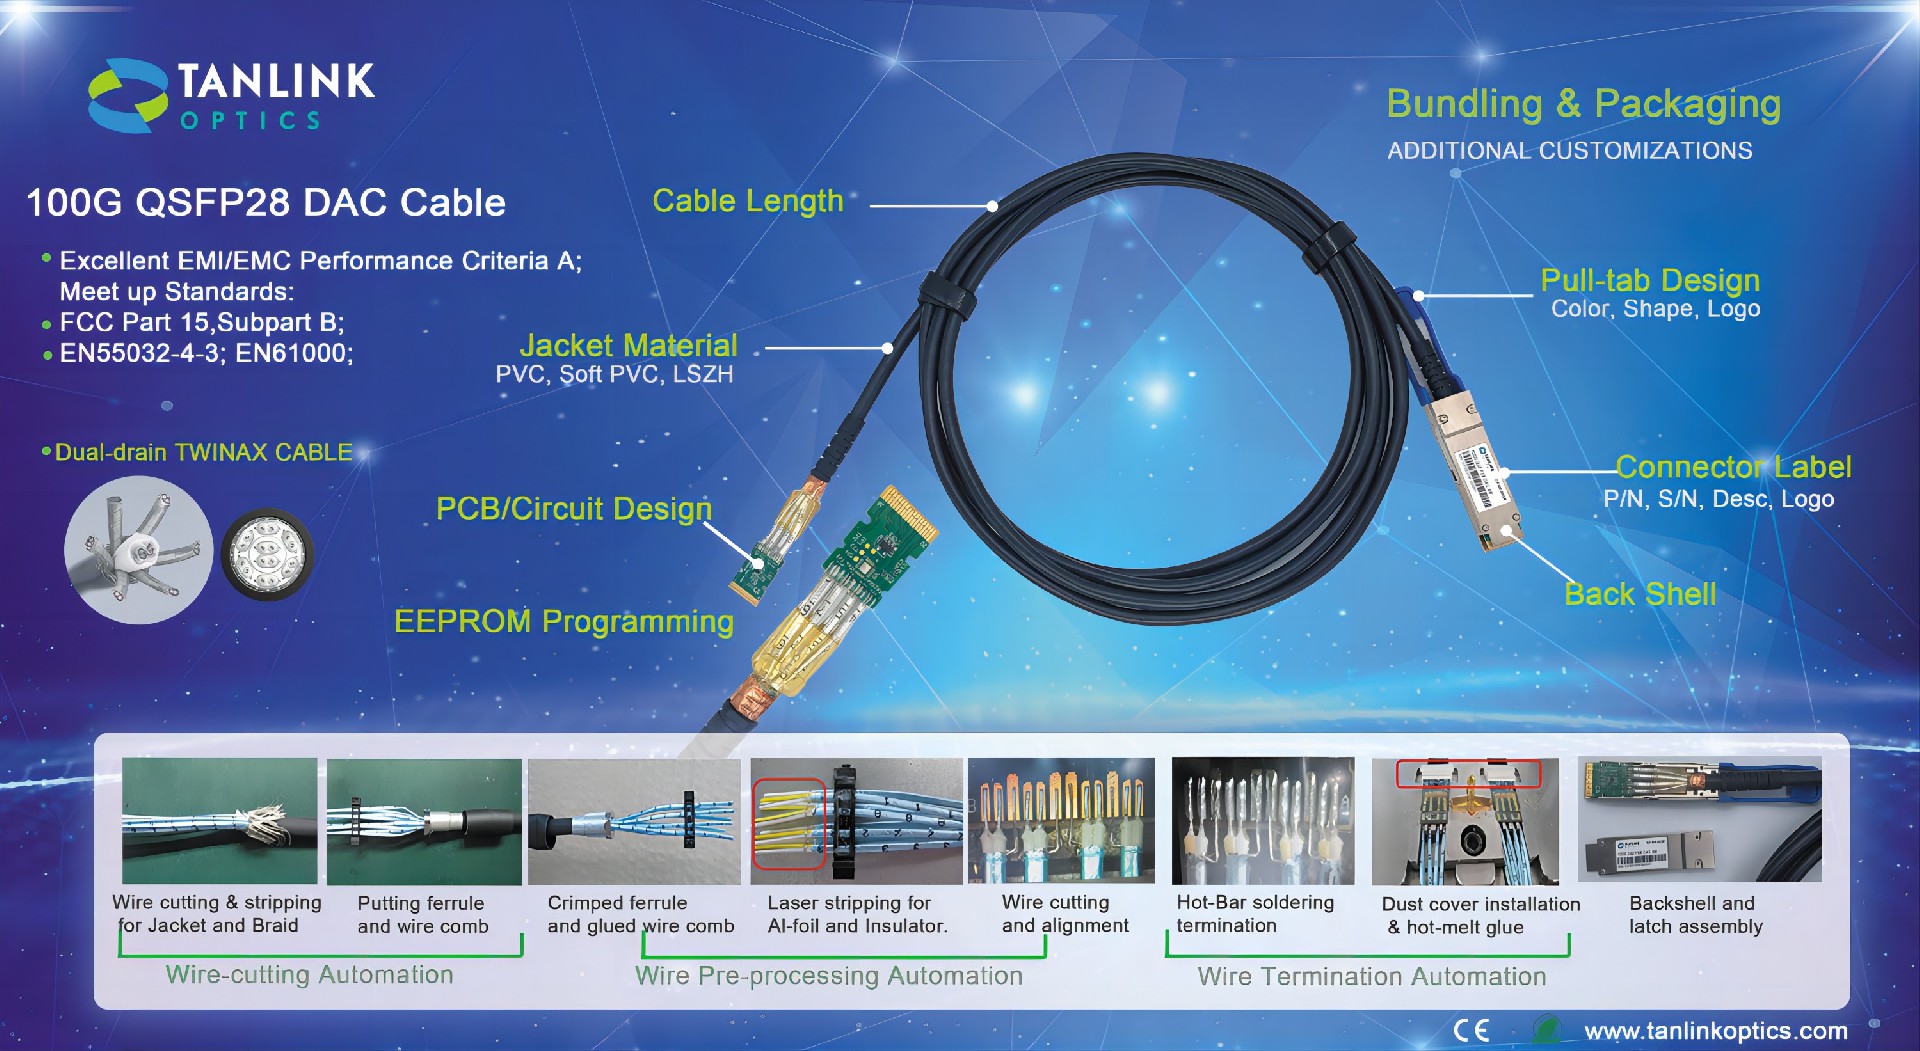 The Tanlink 100G QSFP28 DAC Cable, and its innovative automated manufacturing process